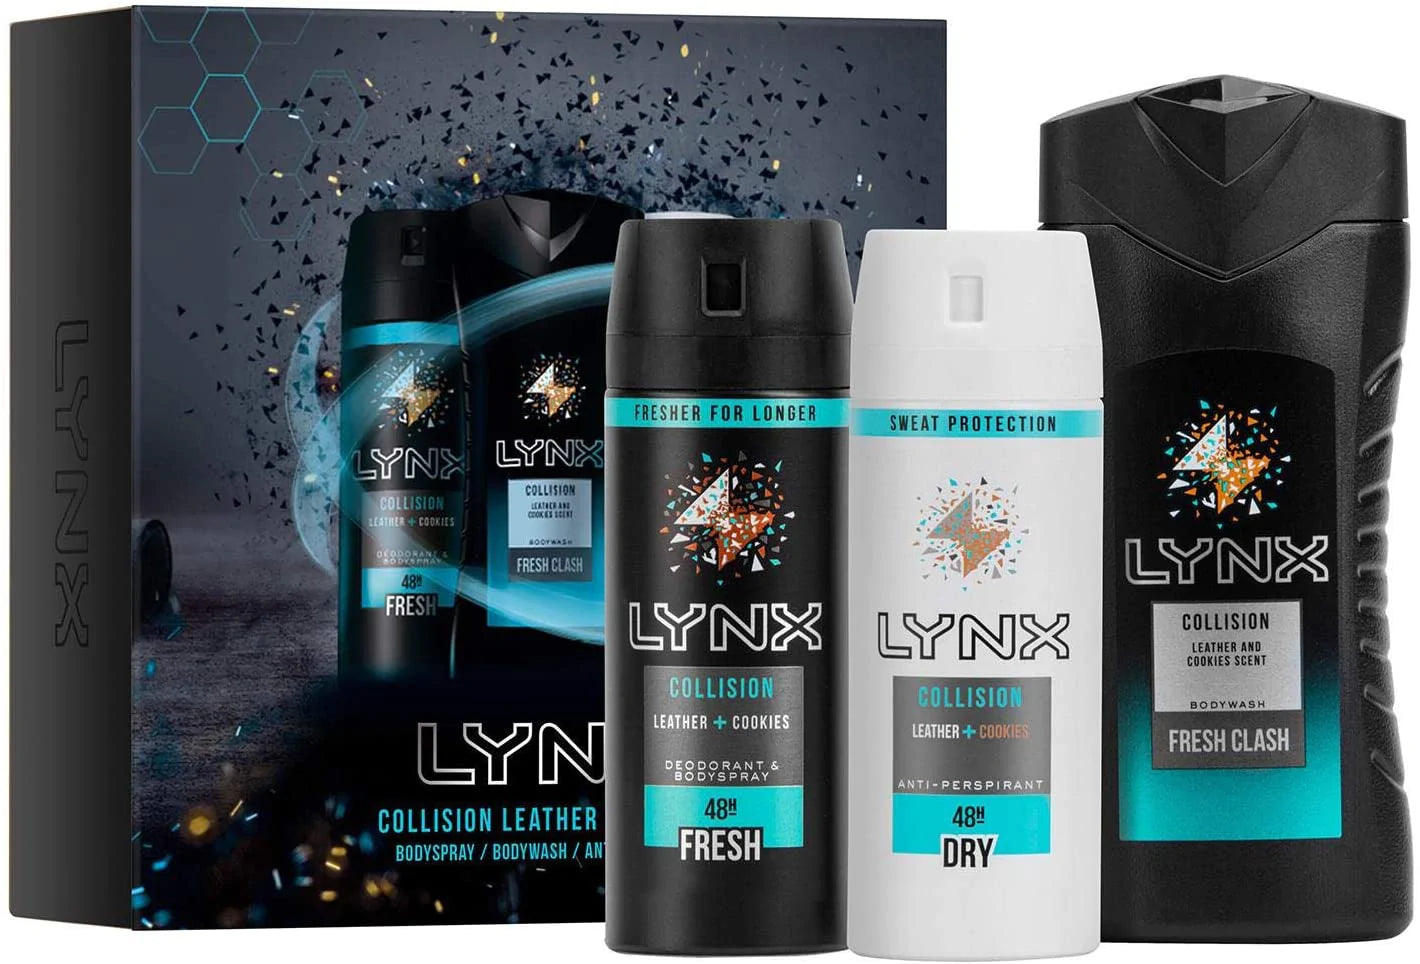 LYNX LEATHER & COOKIES COLLUSION 3 PIECE GIFT SET